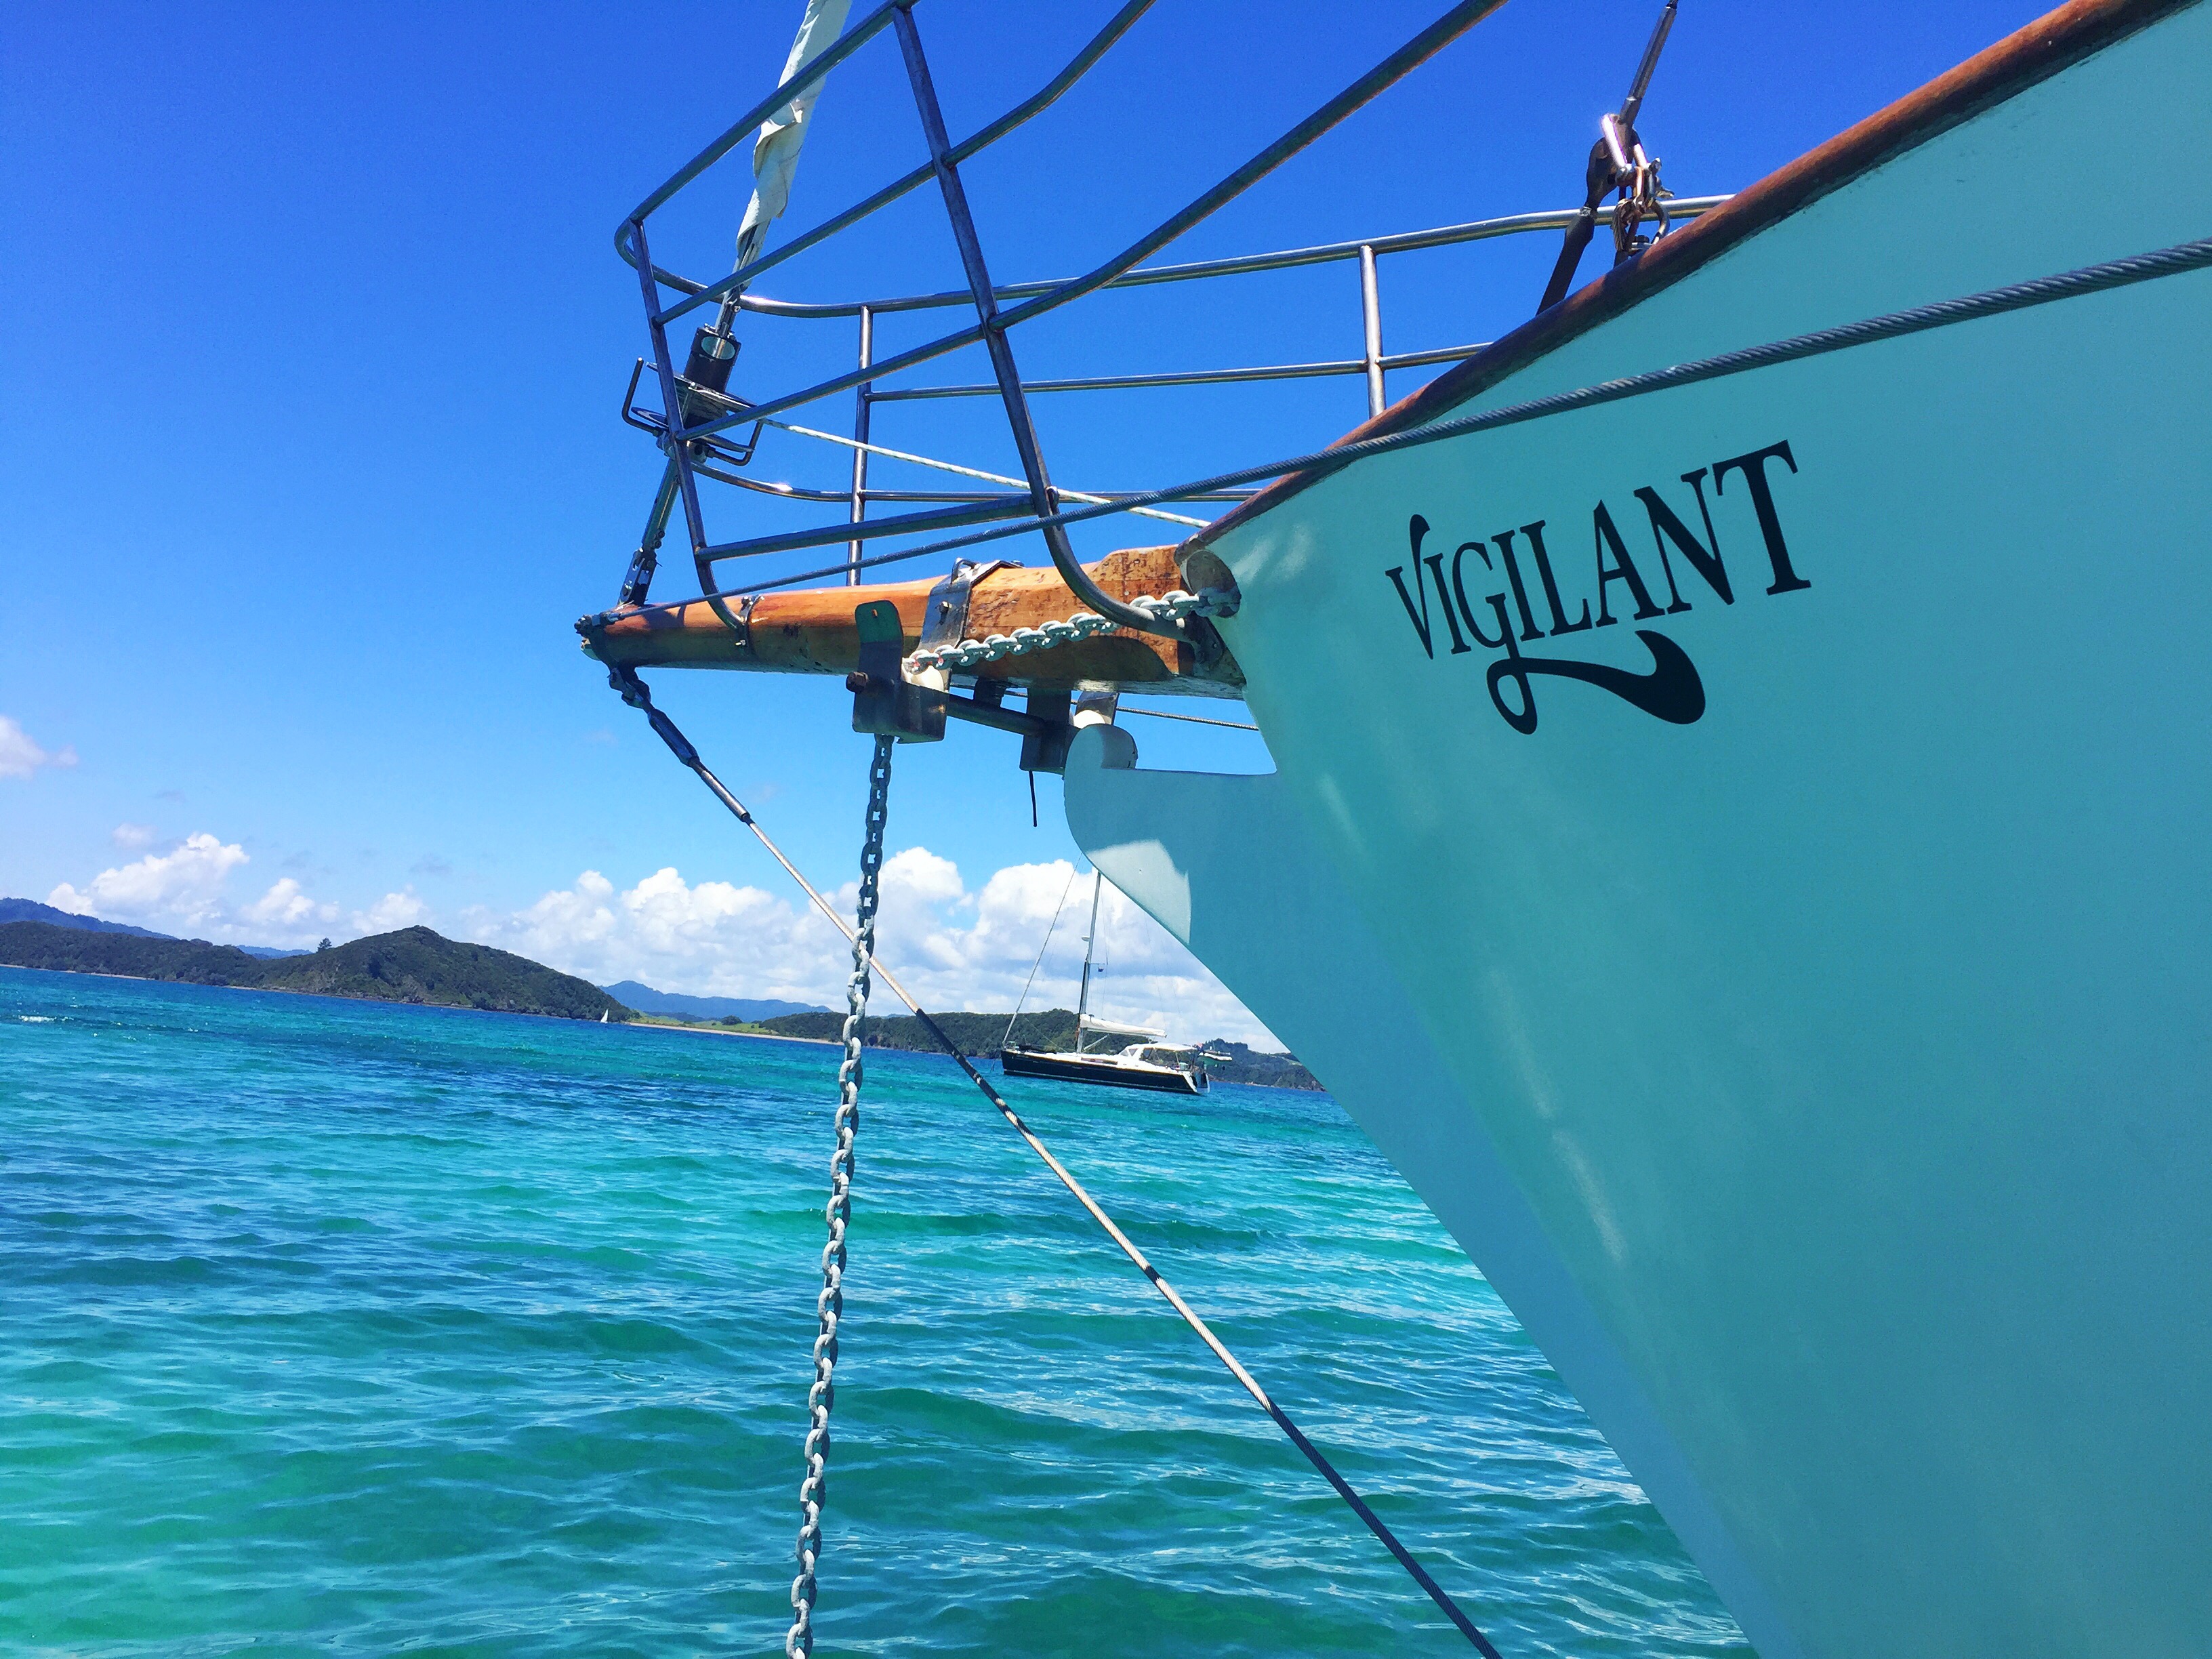 Bowsprit and Anchor chain of Vigilant Yacht